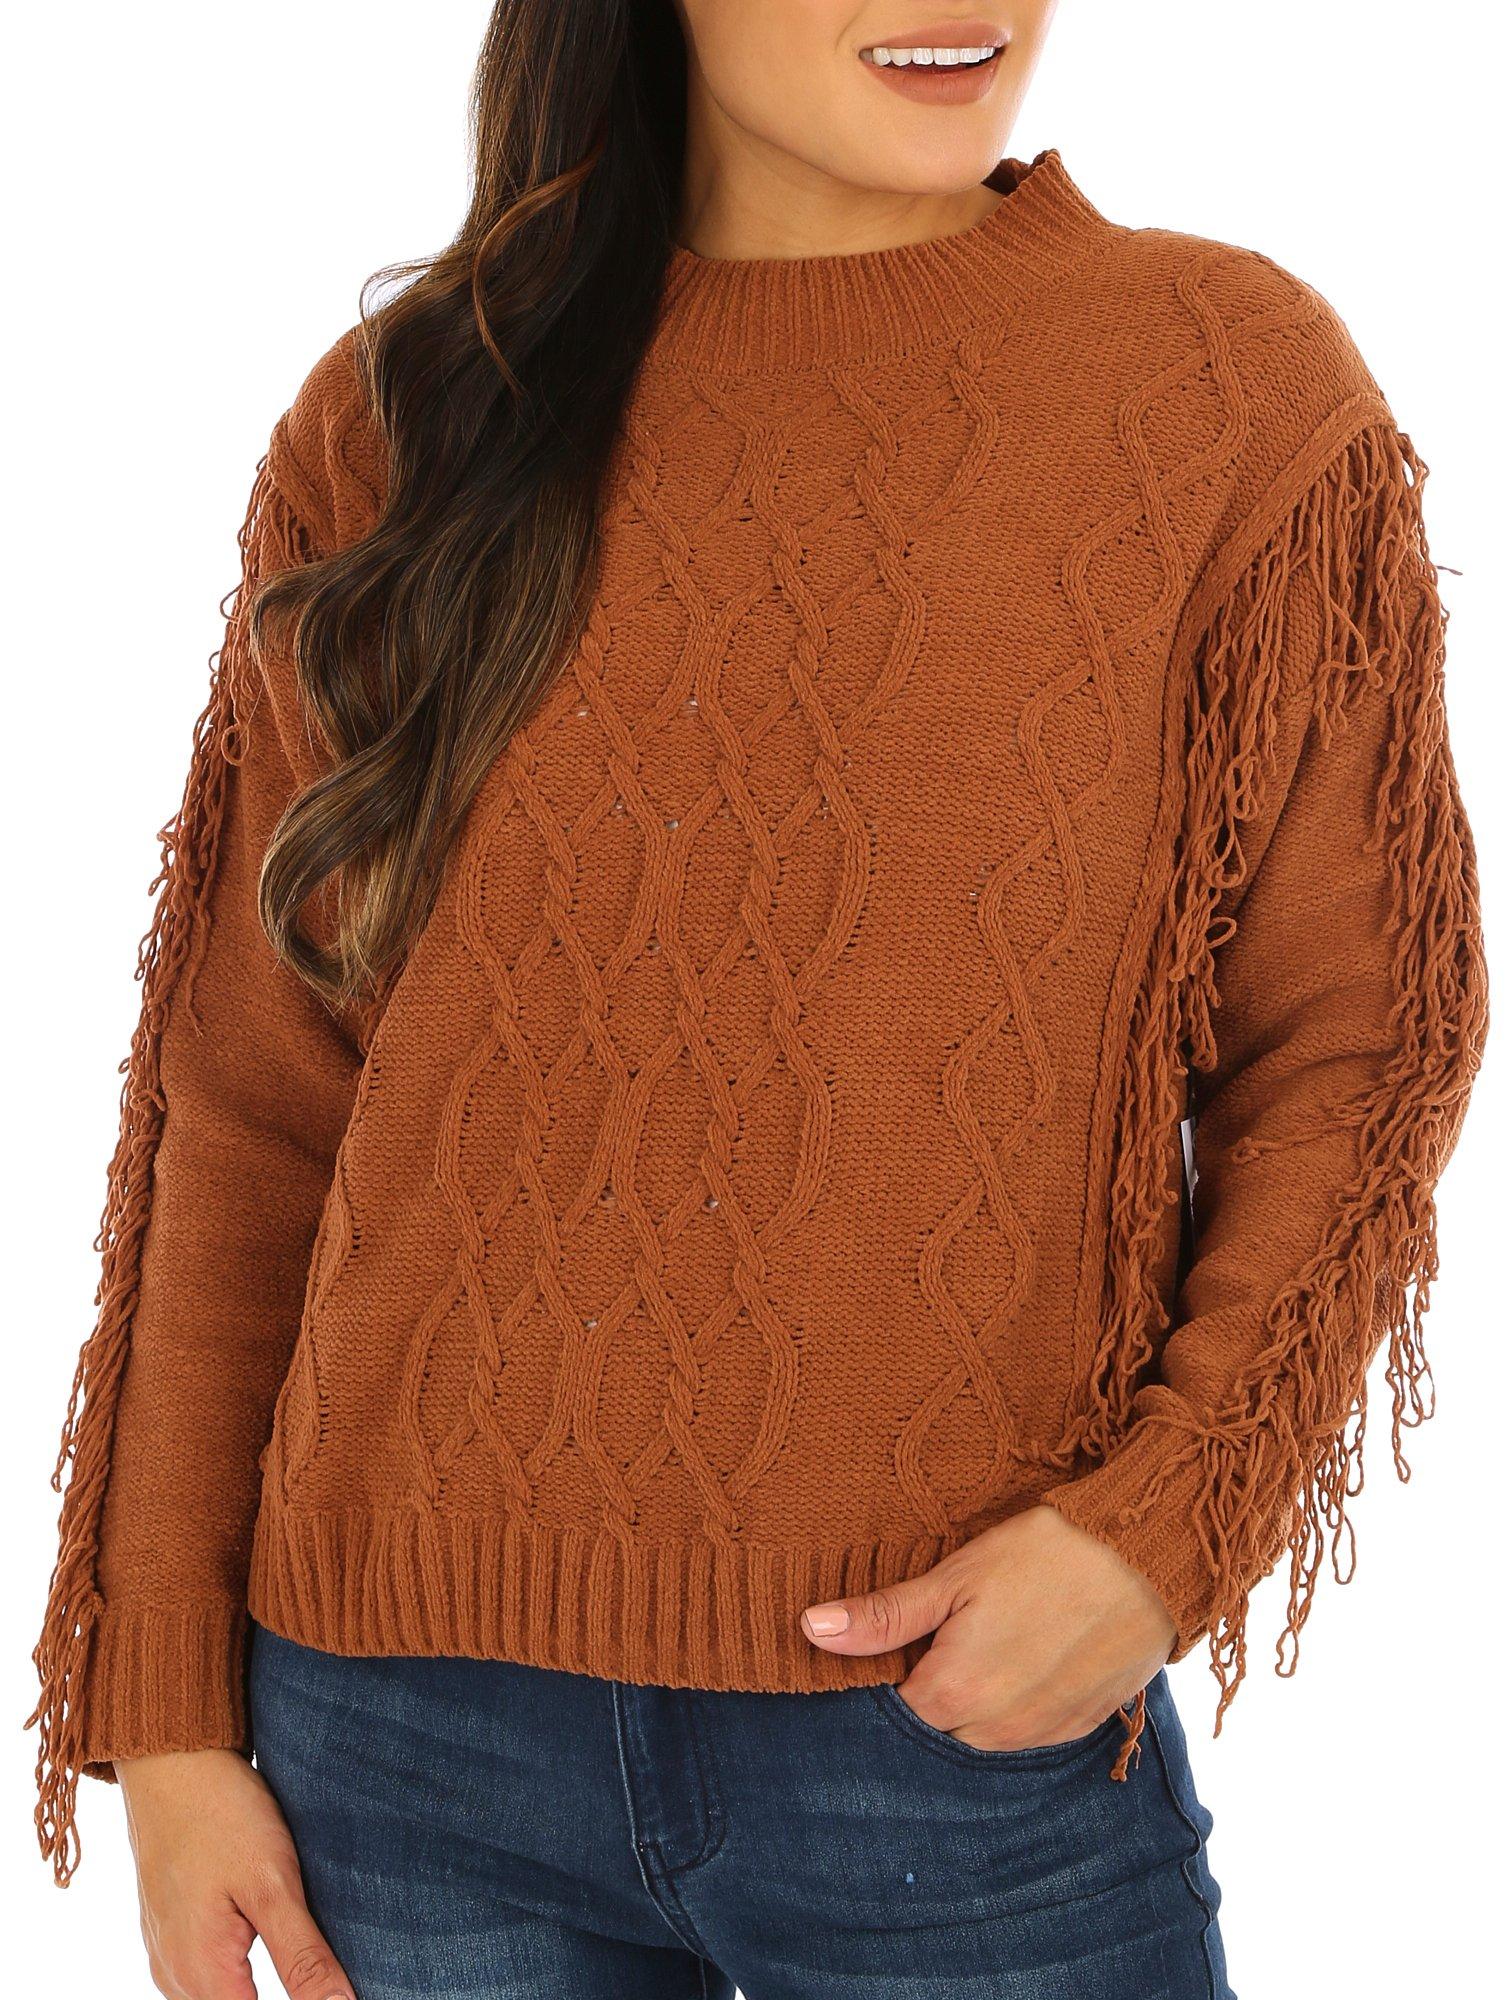 Women's Fringe Cable Knit Sweater - Brown